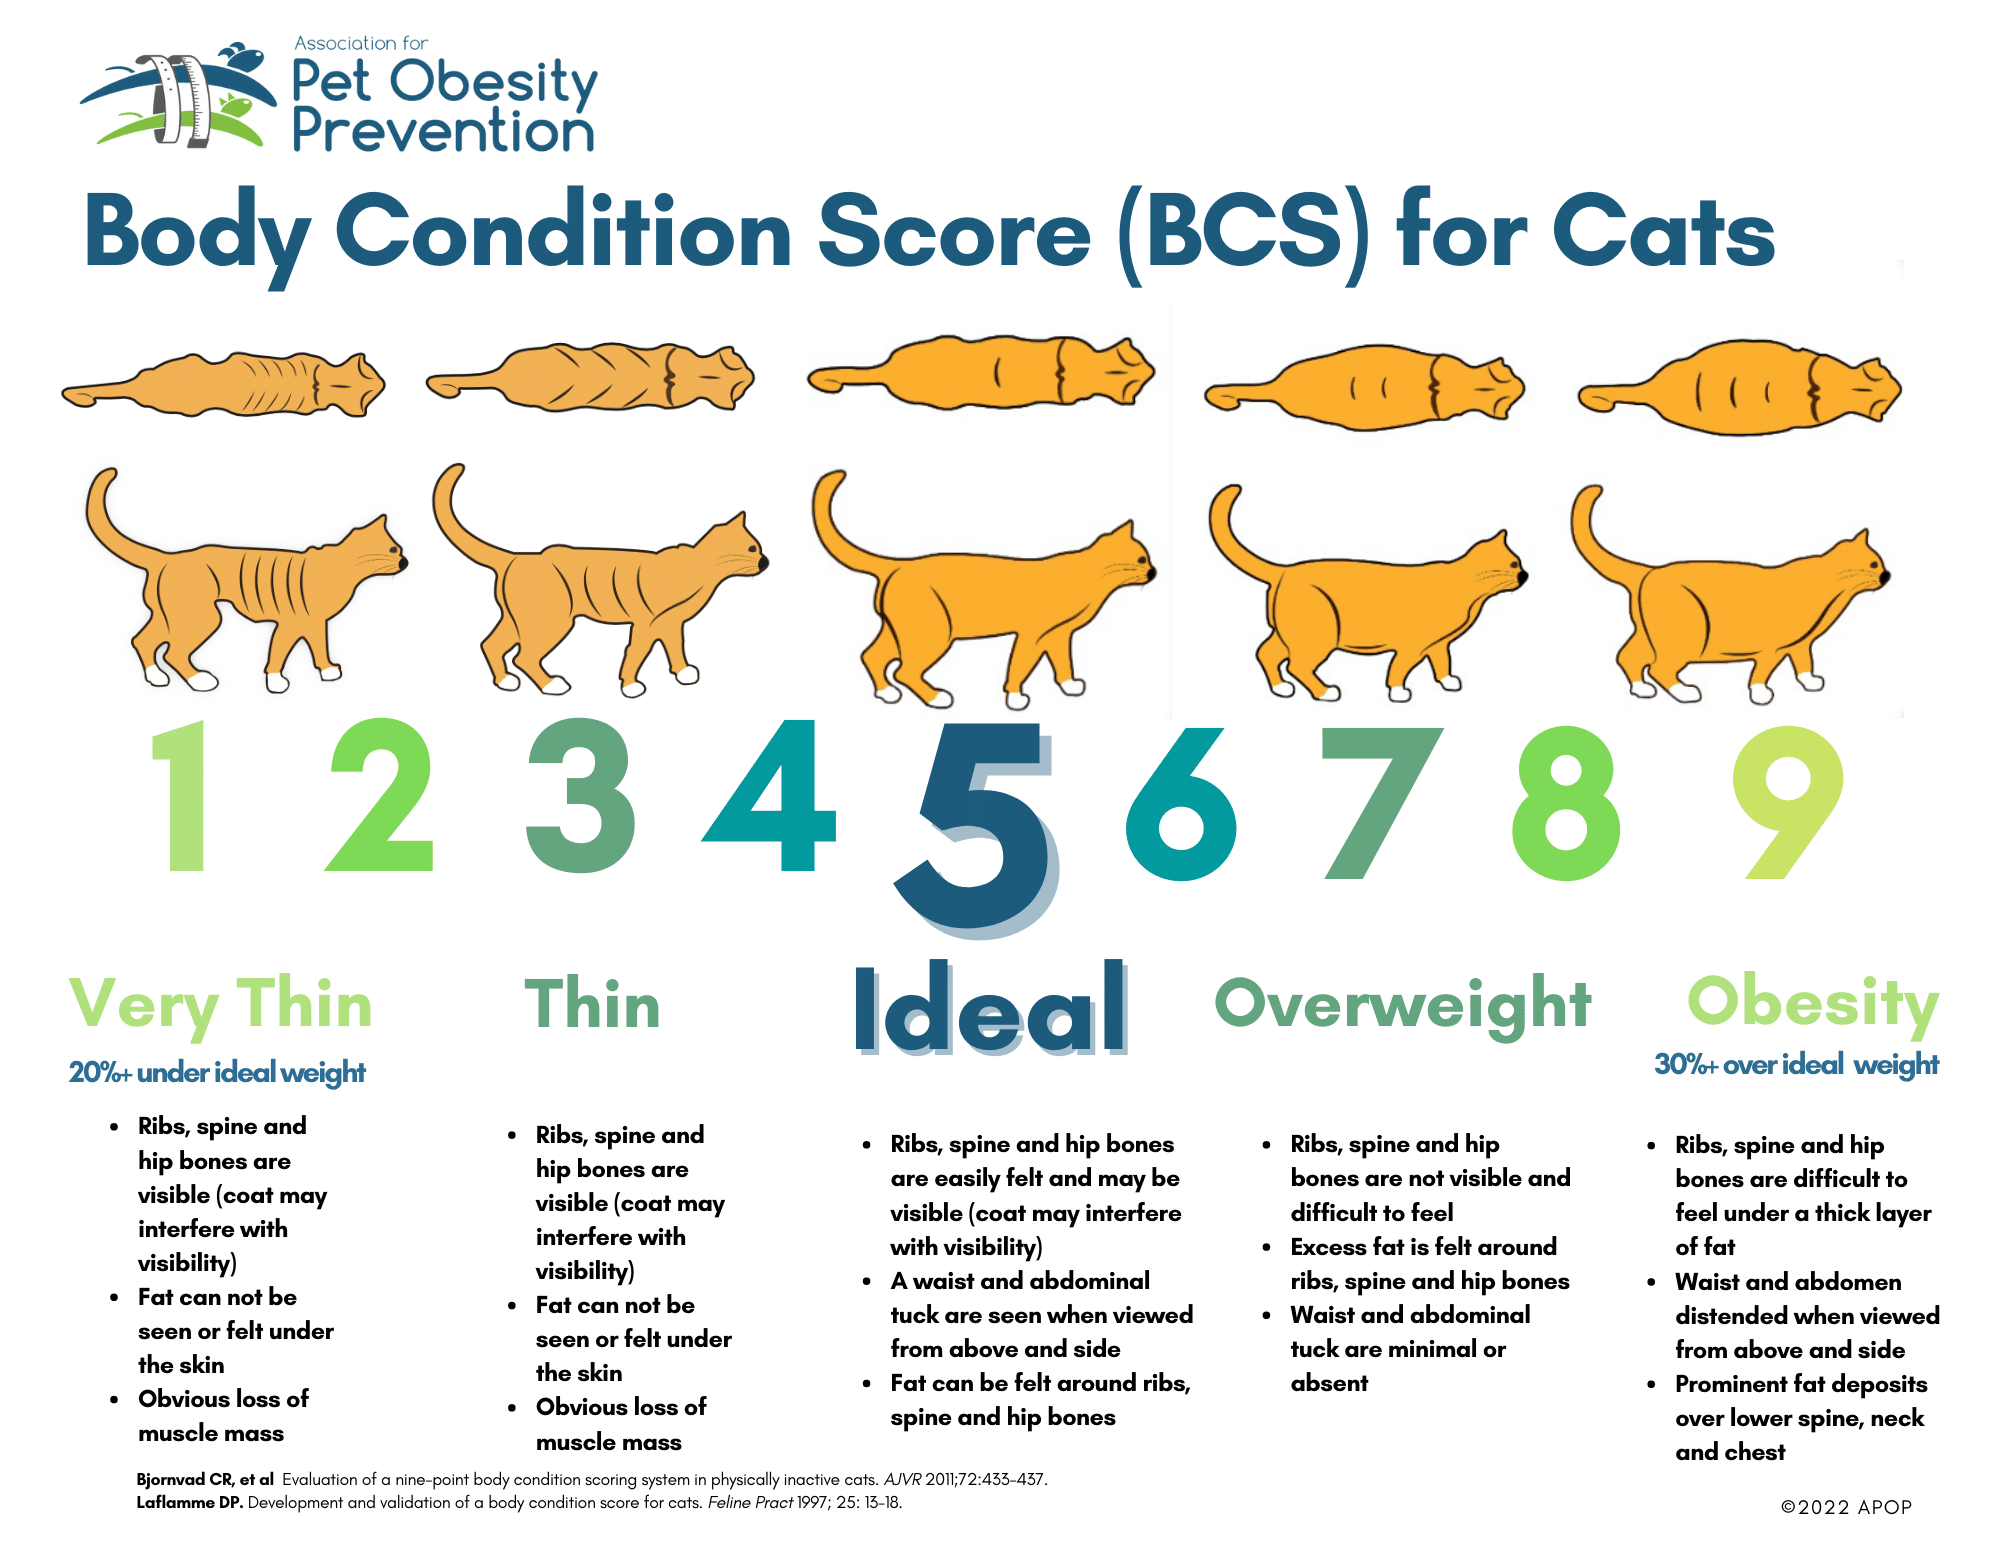 Body Condition Score (BCS) for Cats Source: Association for Pet Obesity Prevention. VERY THIN (20% under ideal weight) Ribs, spine and hip bones are easily visible (coat may interfere with visibility). Fat cannot be seen or felt under the skin. Obvious loss of muscle mass. THIN Ribs, spine and hip bones are visible (coat may interfere with visibility).. Fat cannot be seen or felt under the skin. Obvious loss of muscle mass. IDEAL Ribs, spine and hip bones are easily felt and may be visible (coat may interfere with visibility). A waist and abdominal tuck are seen when viewed from above and side. Fat can be felt around ribs, spine and hip bones. OVERWEIGHT Ribs, spine and hip bones are not visible and difficult to feel Excess fat is felt around ribs, spine and hip bones. Waist and abdominal tuck are minimal or absent. OBESITY (30% over ideal weight) Ribs, spine and hip bones are difficult to feel under a thick layer of fat. Waist and abdomen distended when viewed from above and side. Prominent fat deposits over lower spine, neck and chest. 